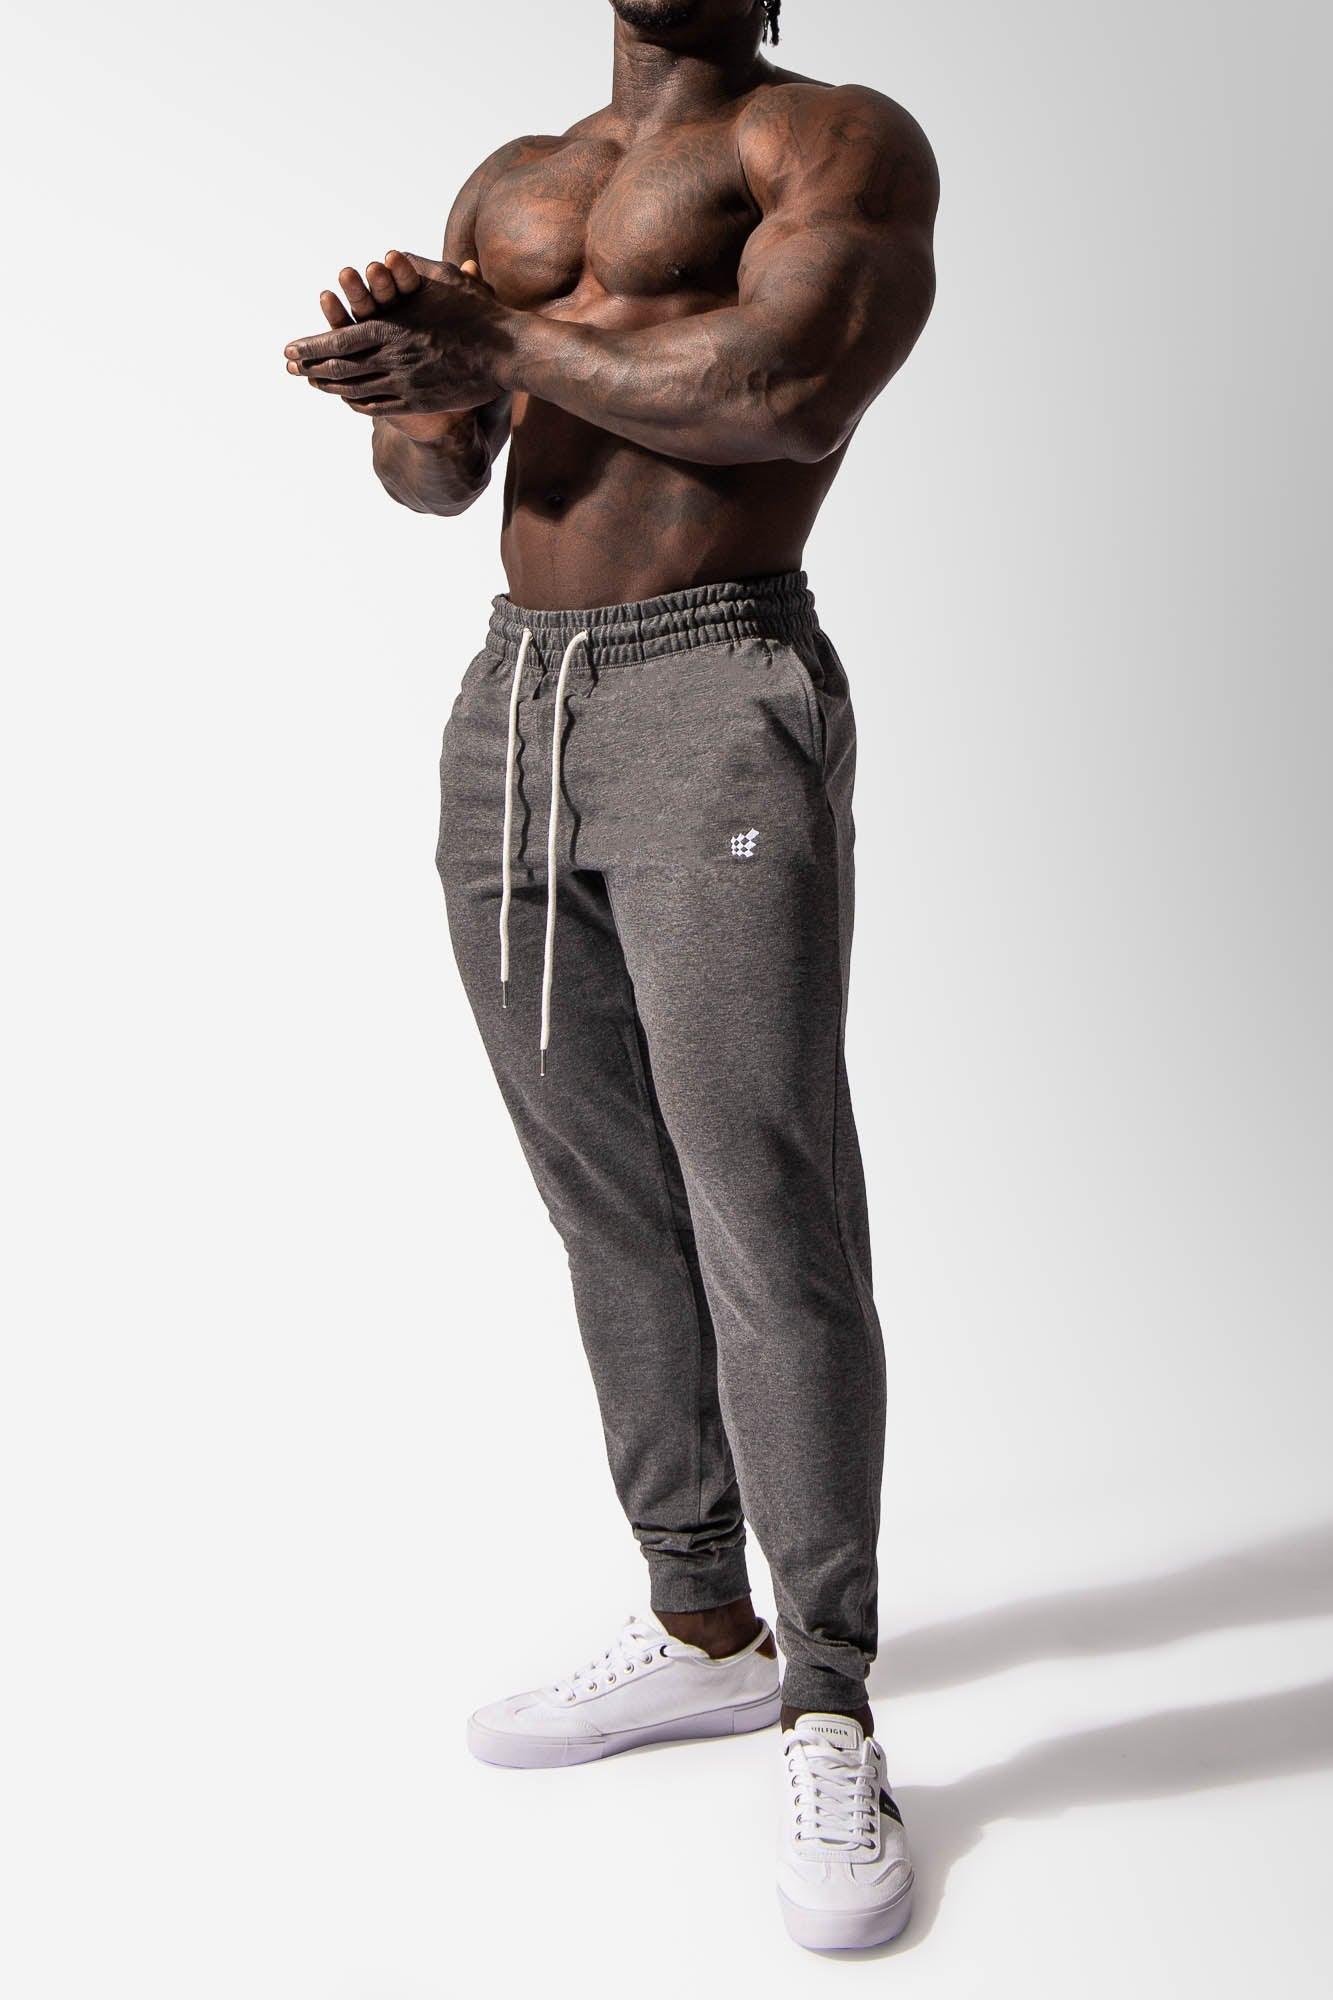 THE GYM PEOPLE Mens' Fleece Joggers Pants with Deep Pockets in Loose-fit  Style-L 